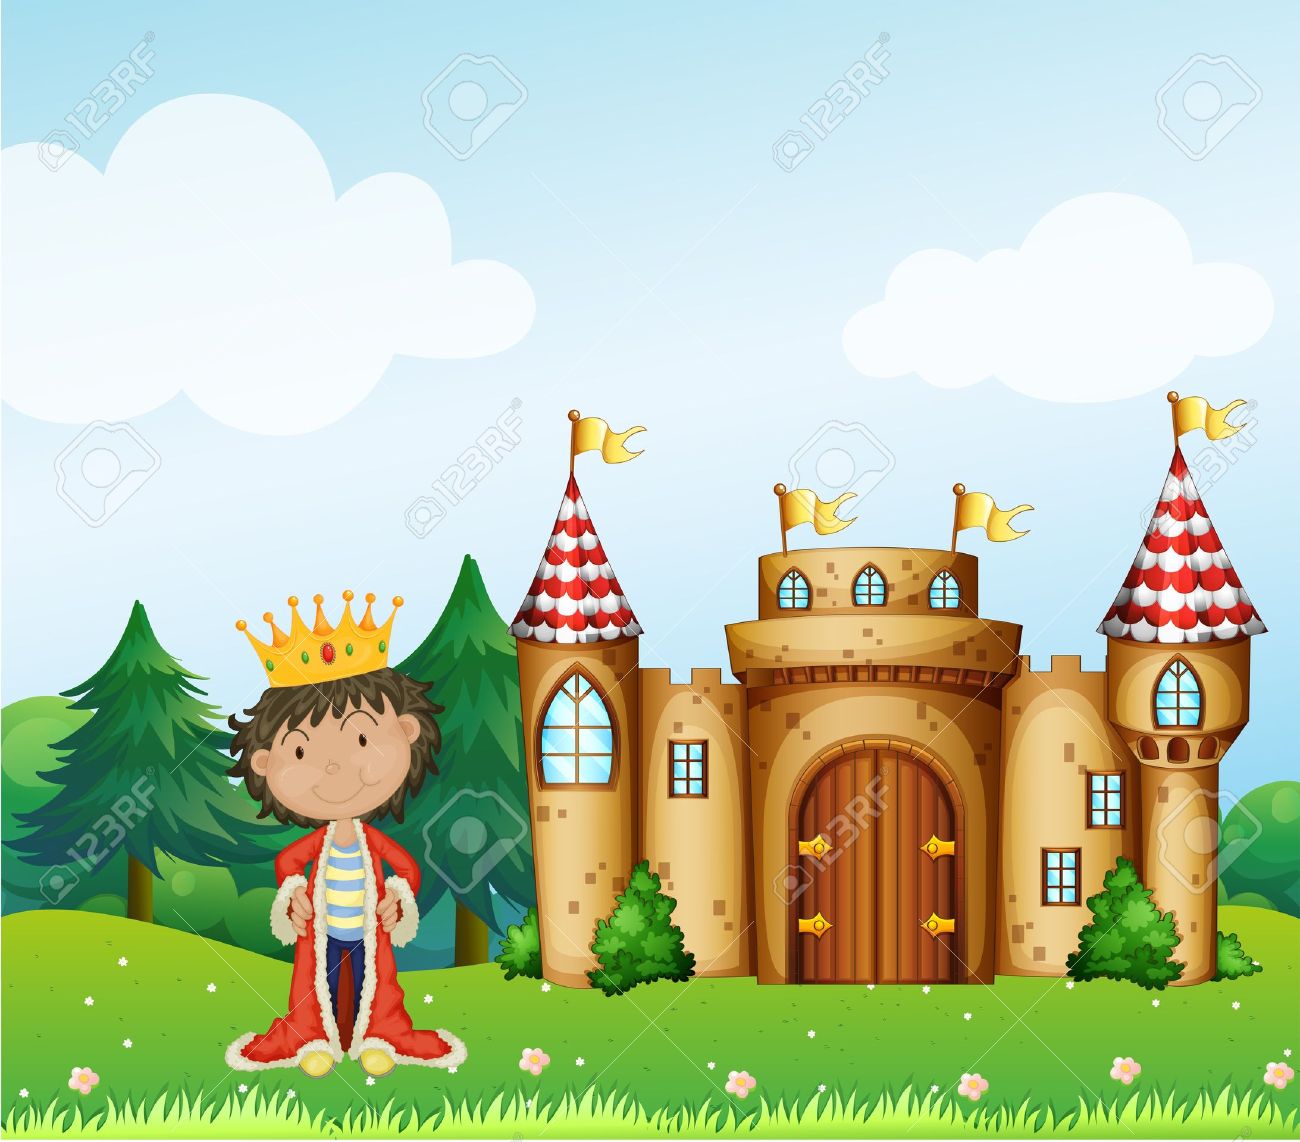 The palace clipart - Clipground